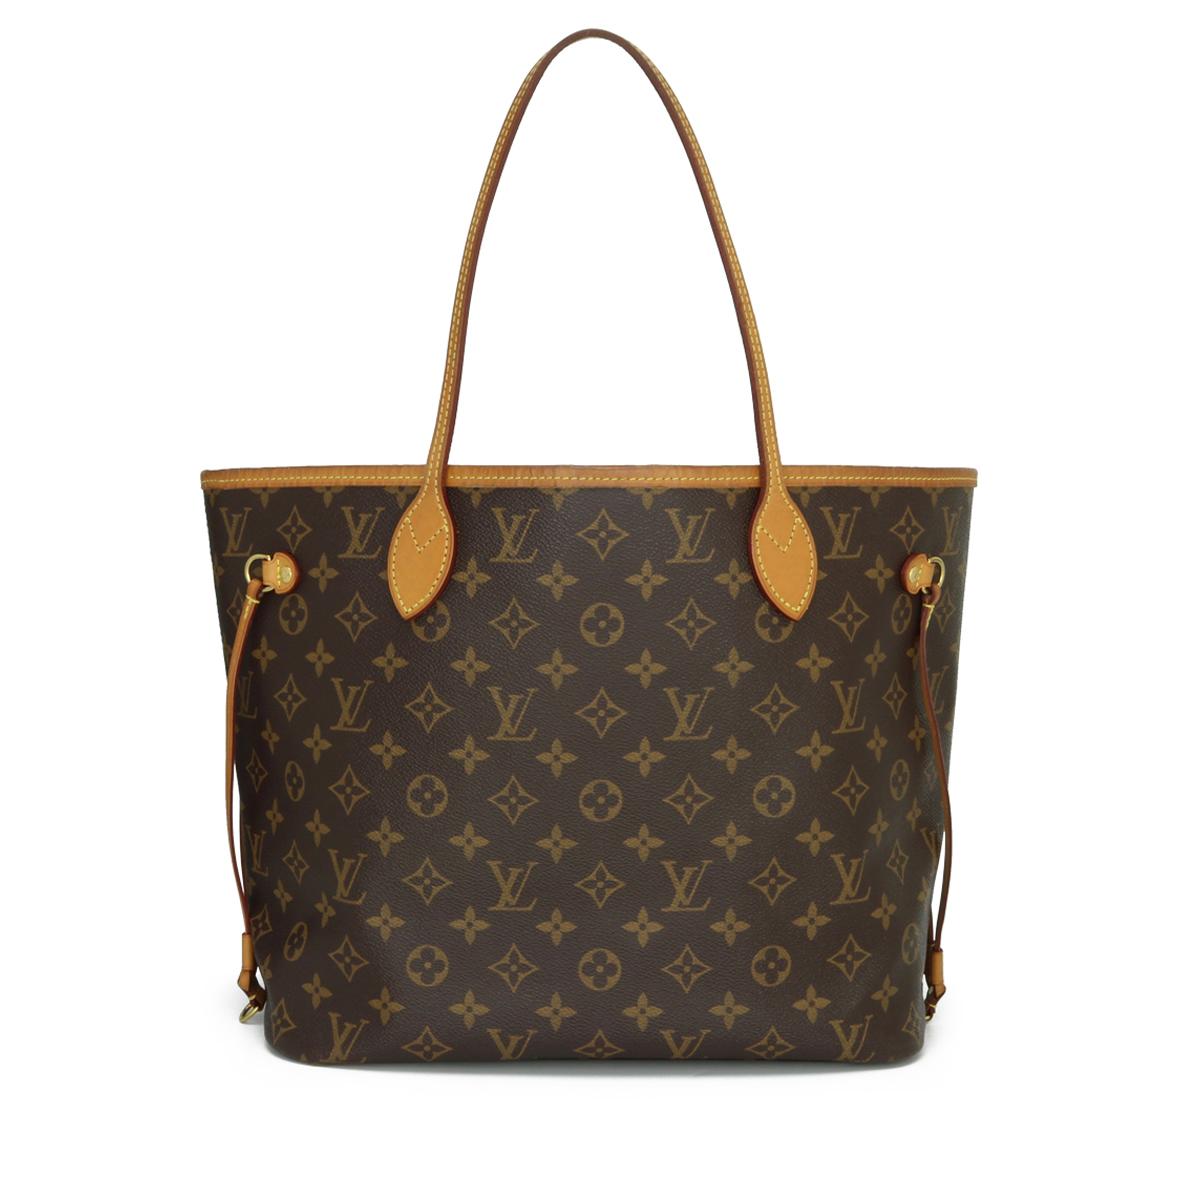 Louis Vuitton Neverfull MM in Monogram with Cherry Red Interior 2019.

This bag is in good condition. 

- Exterior Condition: Good condition. Light storage creasing to the canvas. Light surface rubbing to four base corners. General marking and